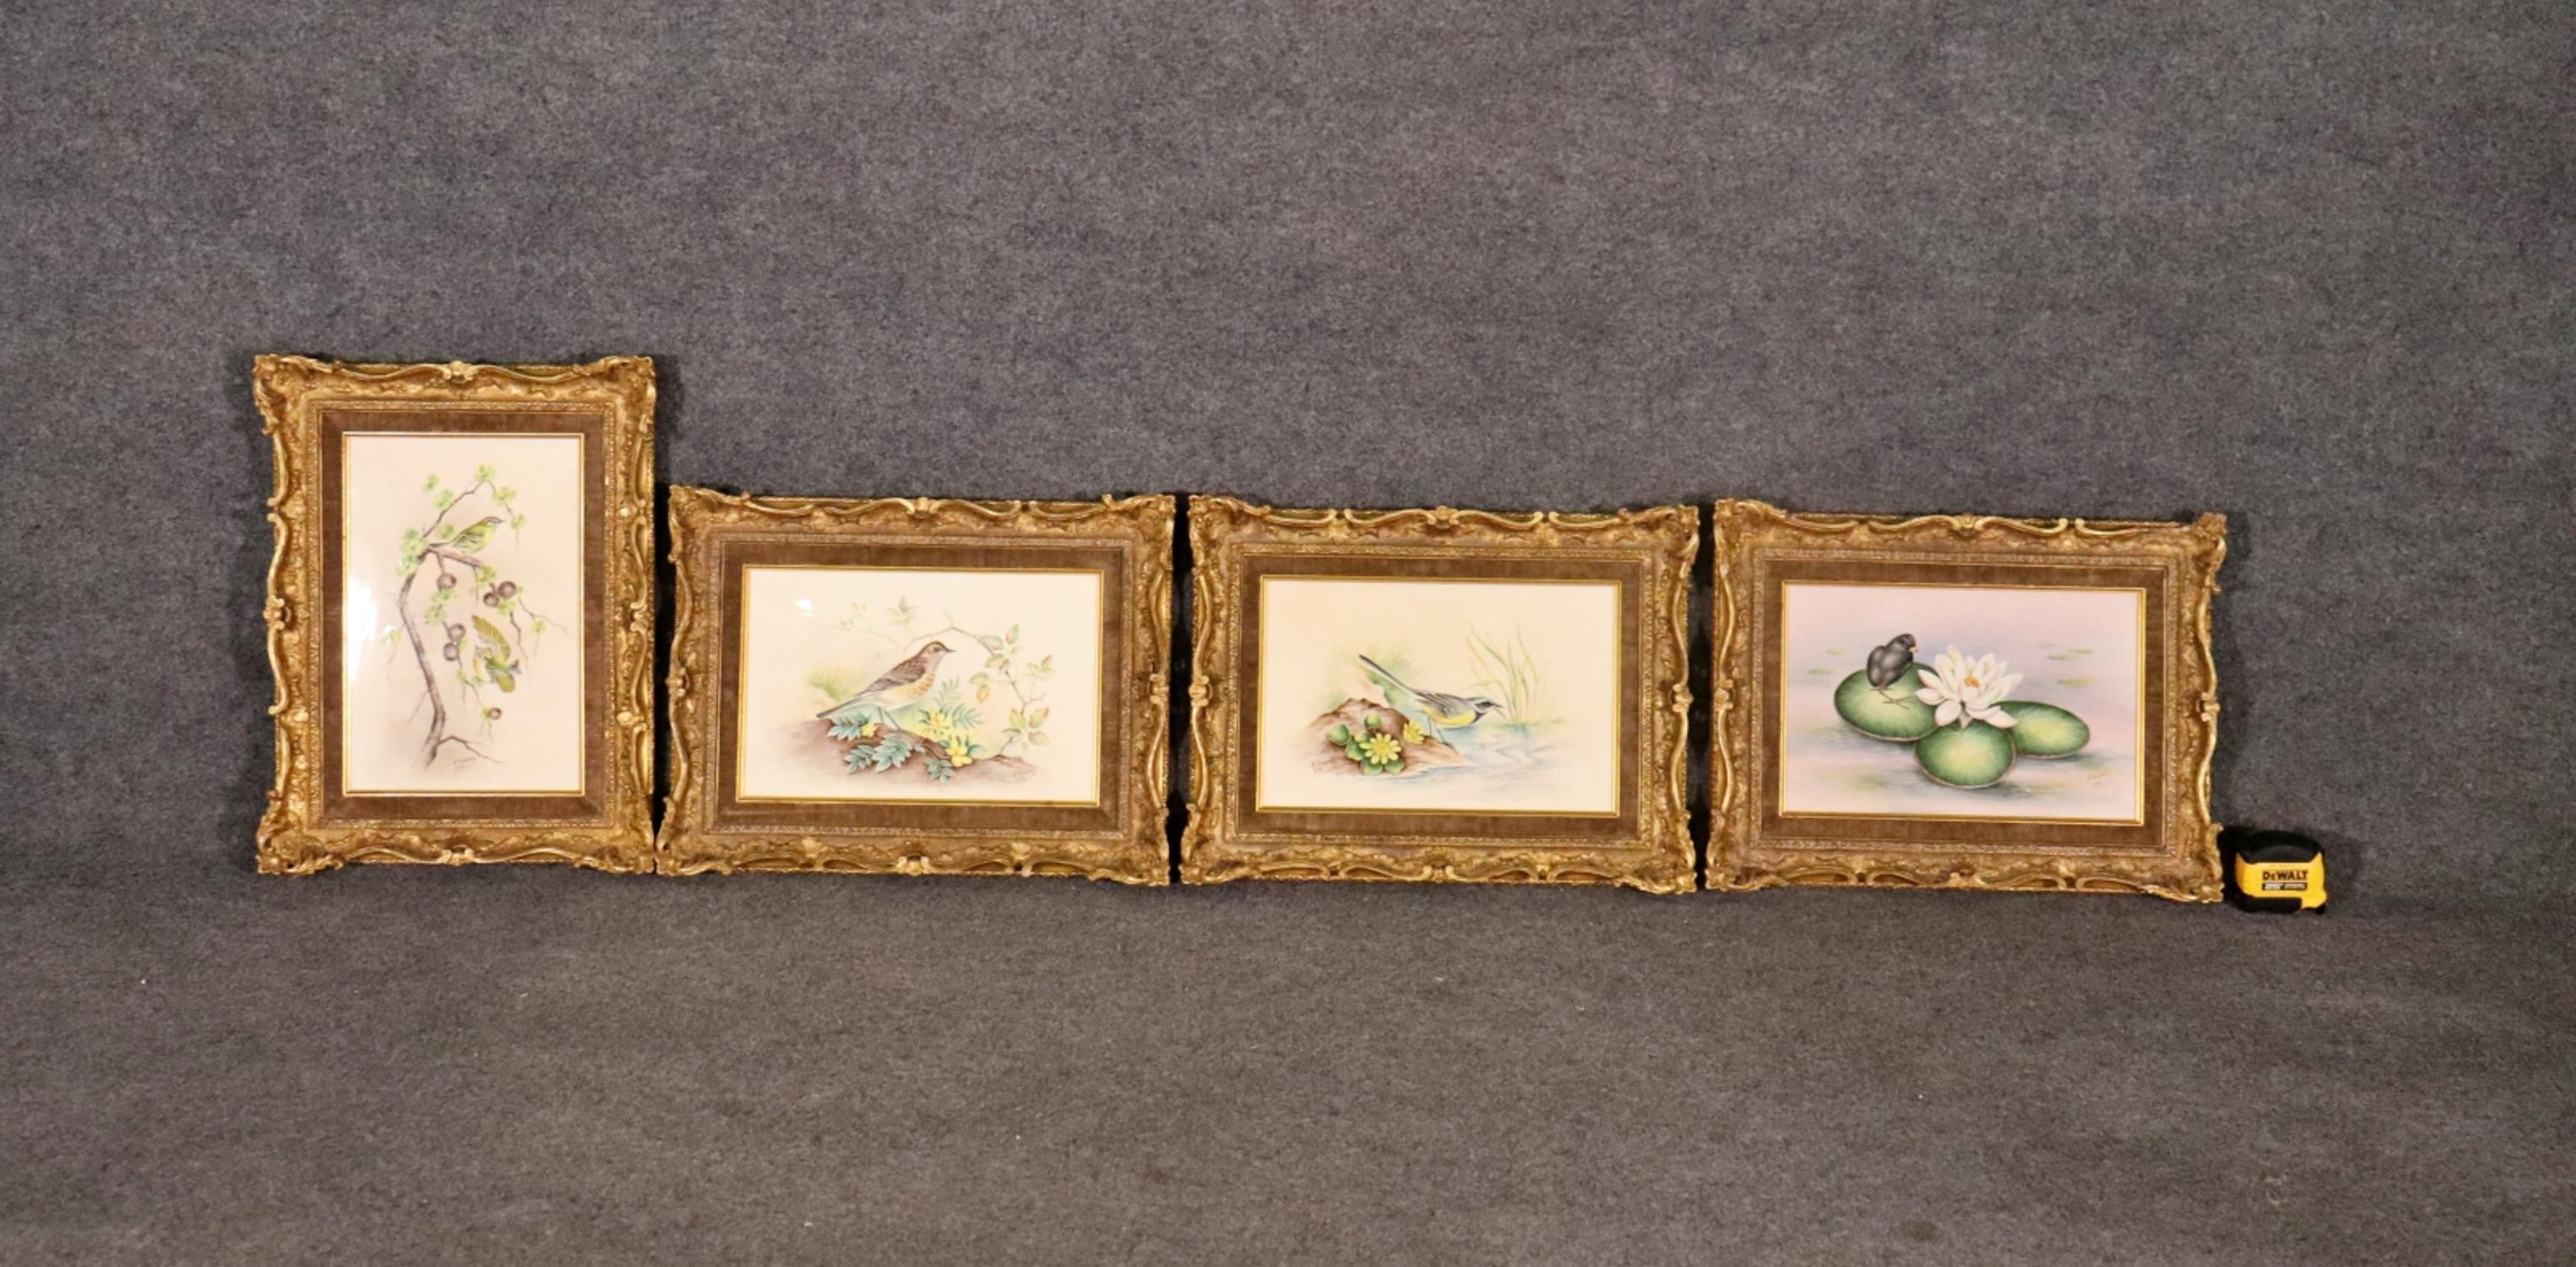 Signed E. Townsend and dated 1974. Number 5 (Goldcrests), 6 (Meadow Pipit), 7 (Grey Wagtail) and 8 (Moorhen Chick) of 15. From a limited edition of 25 sets. British bird subjects by the Worcester Royal Porcelain Co. LTD. Hand carved frame